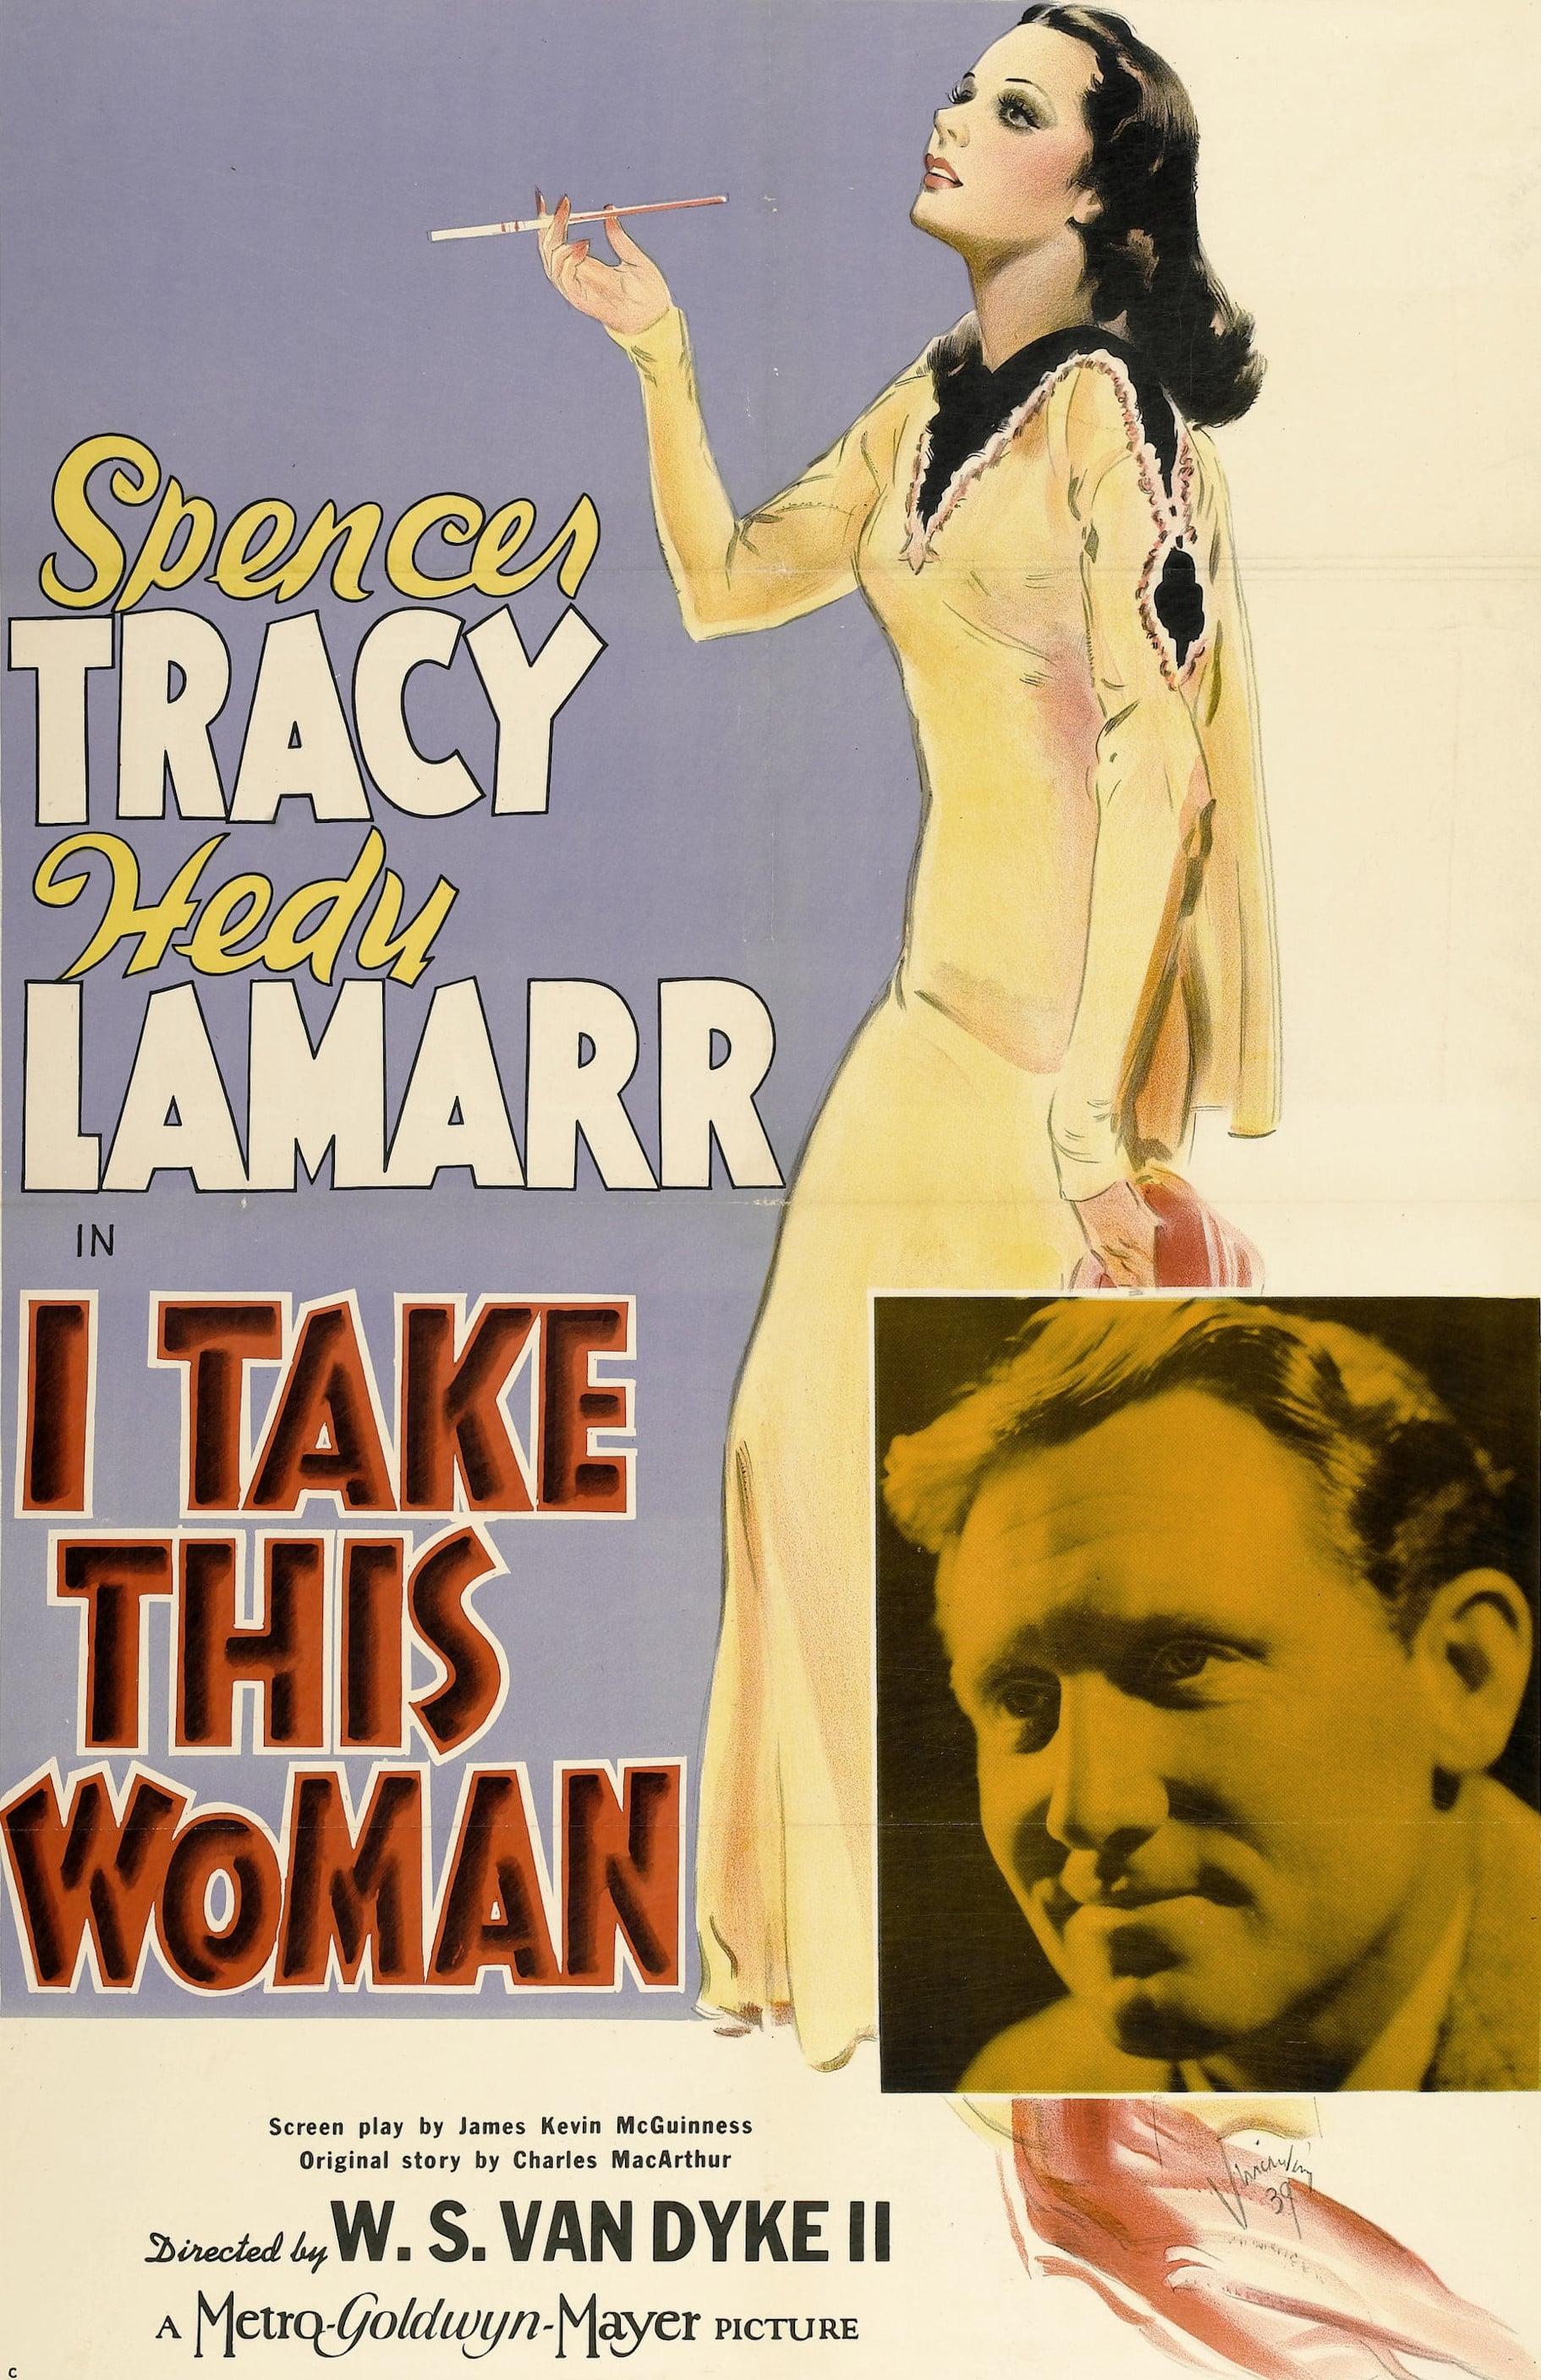 I Take This Woman poster